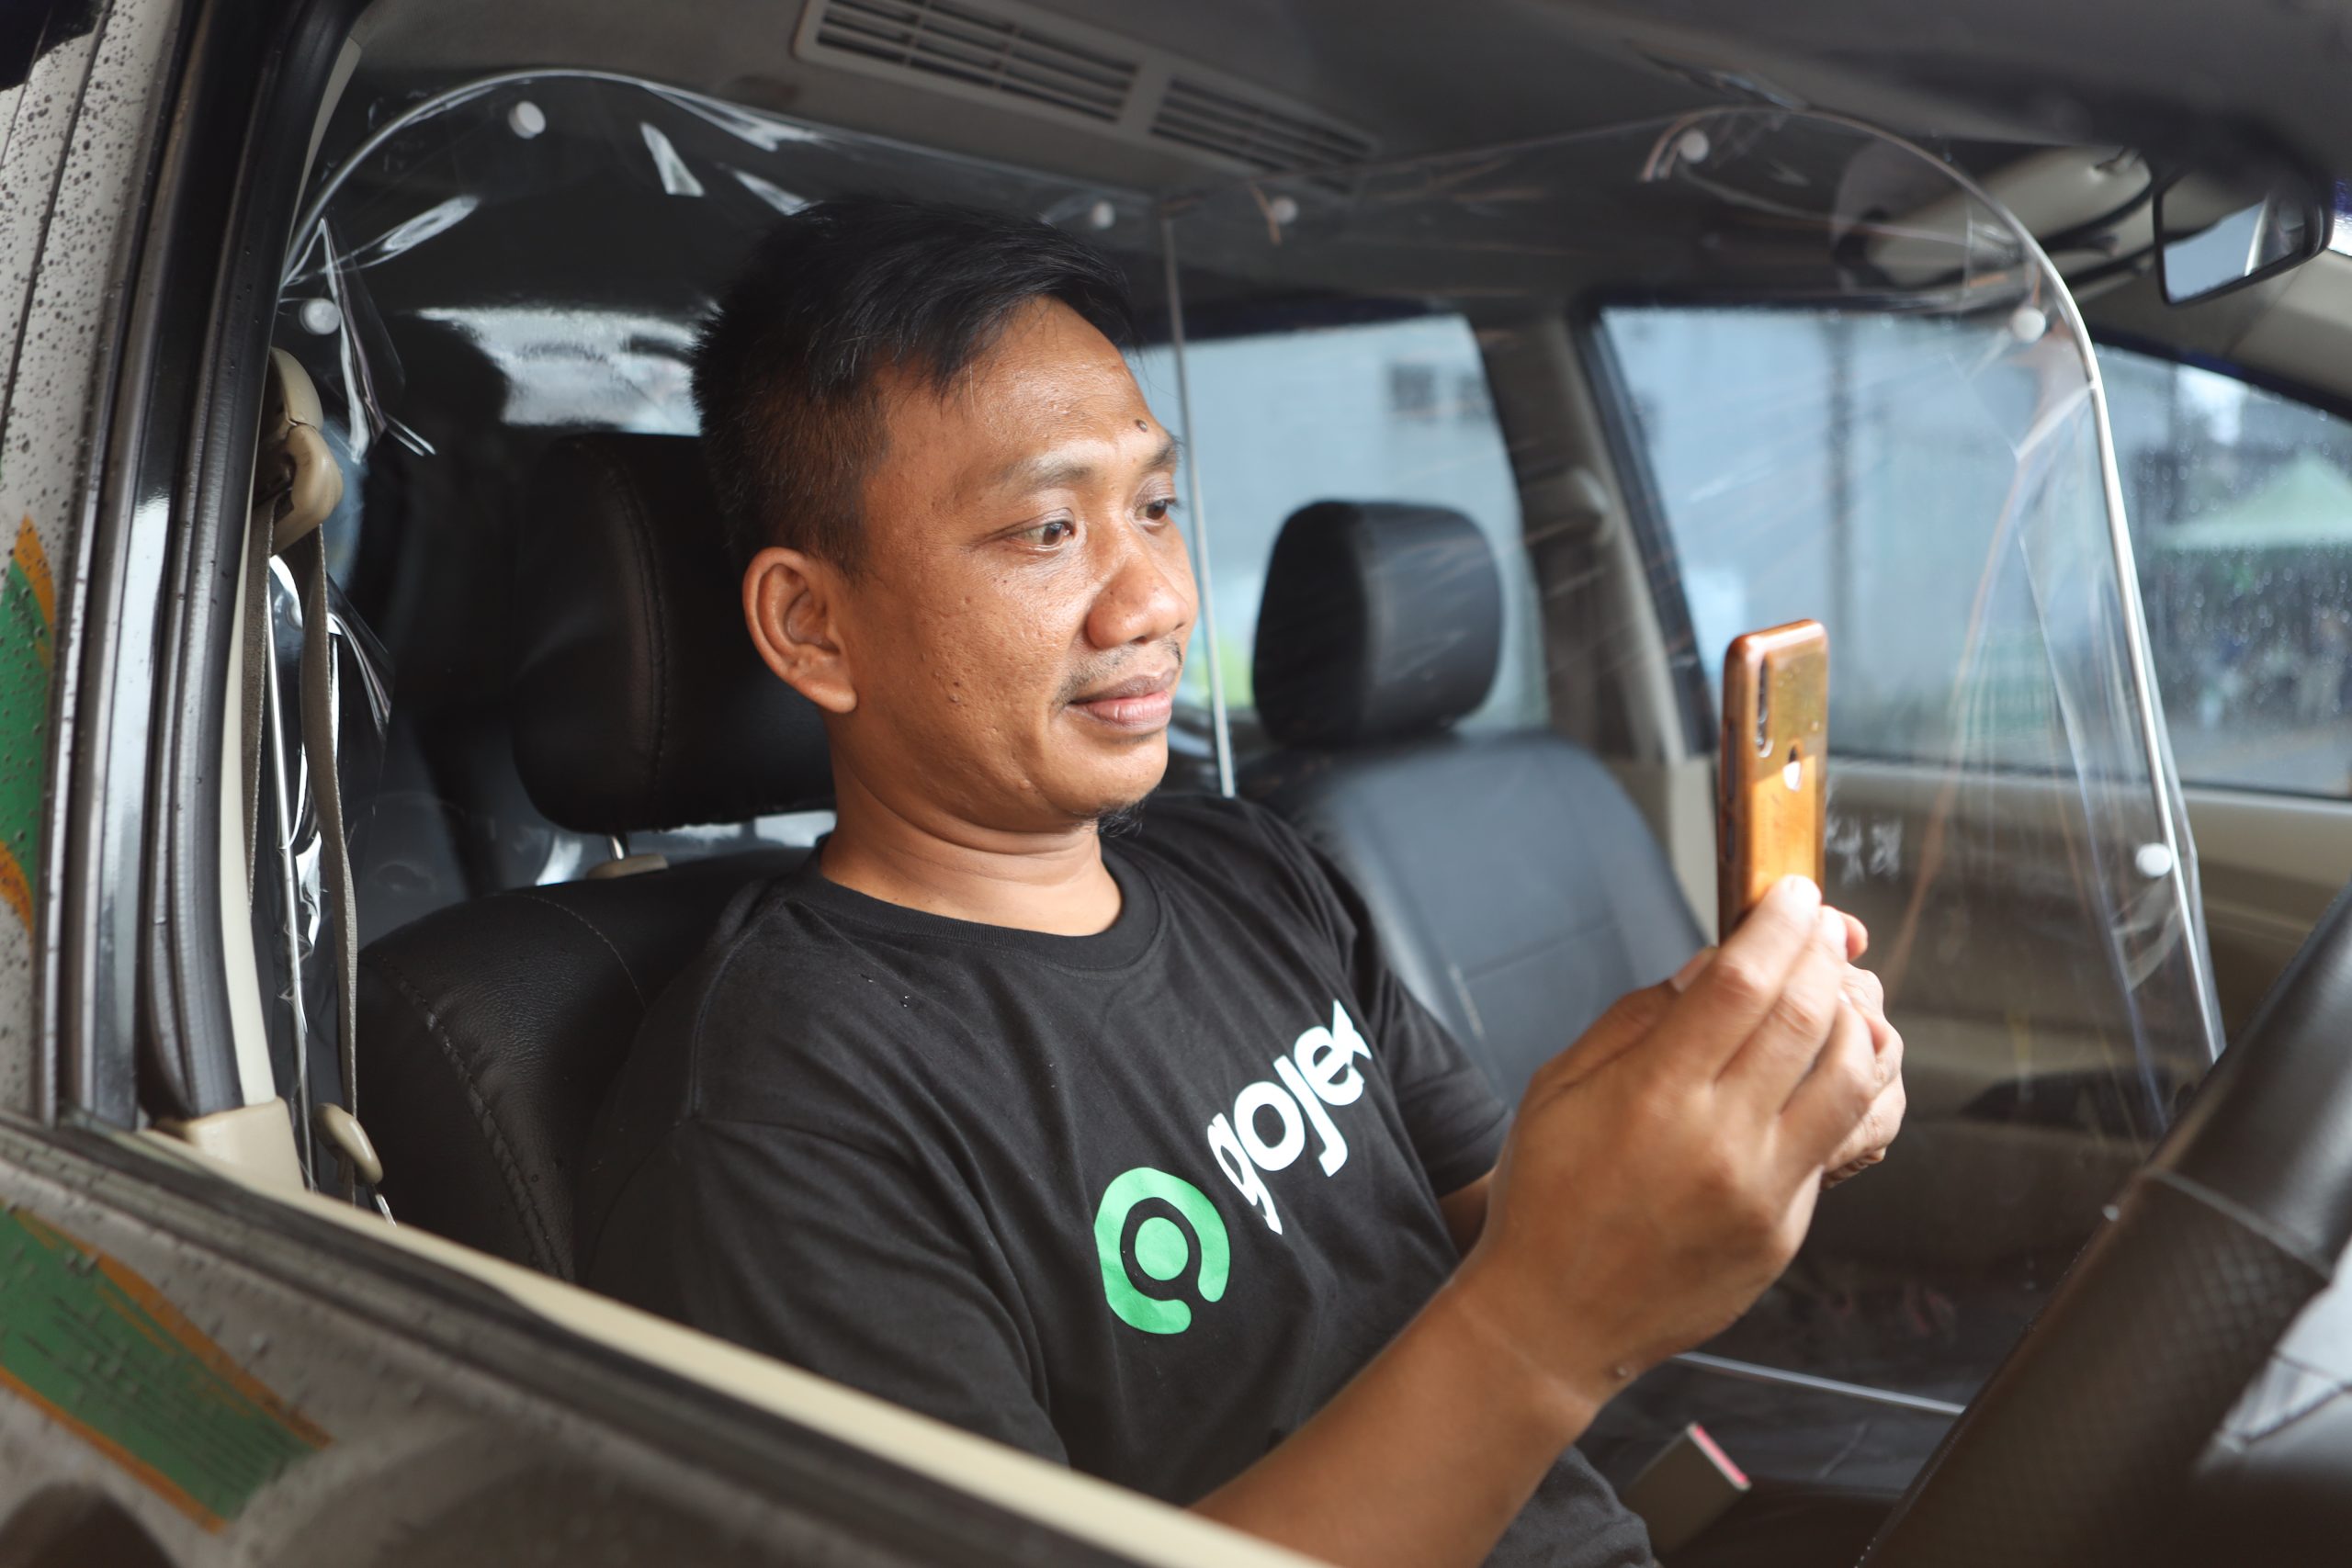 Gojek launches facial recognition login for drivers, citing hacking prevention